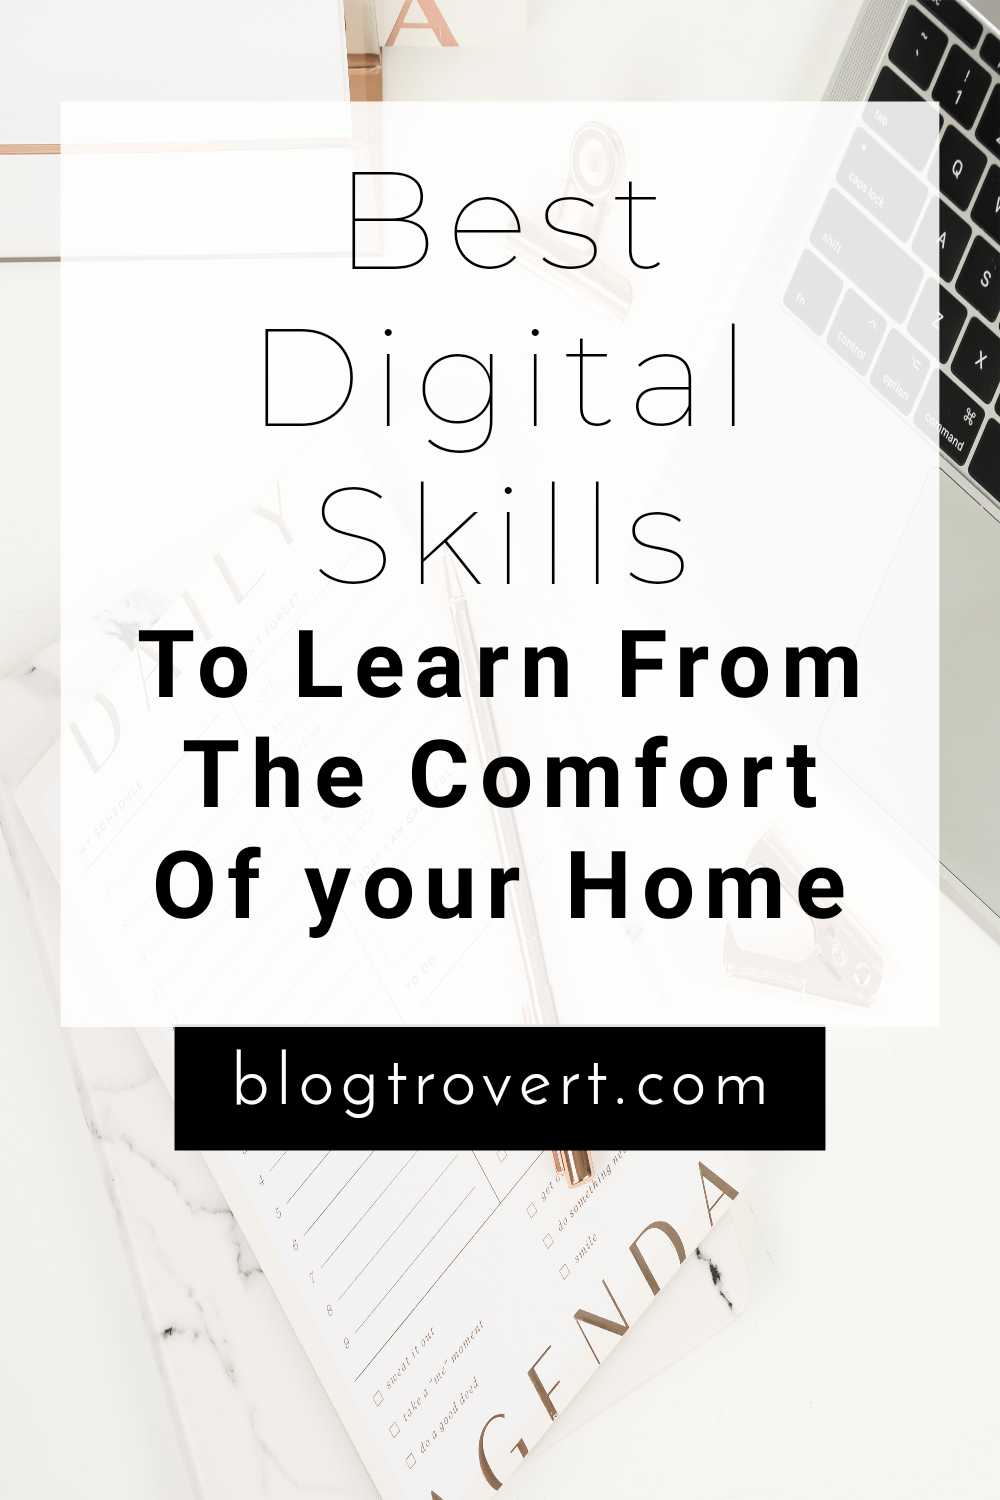 5 of the Best Digital Skills and Where to Learn Them 2